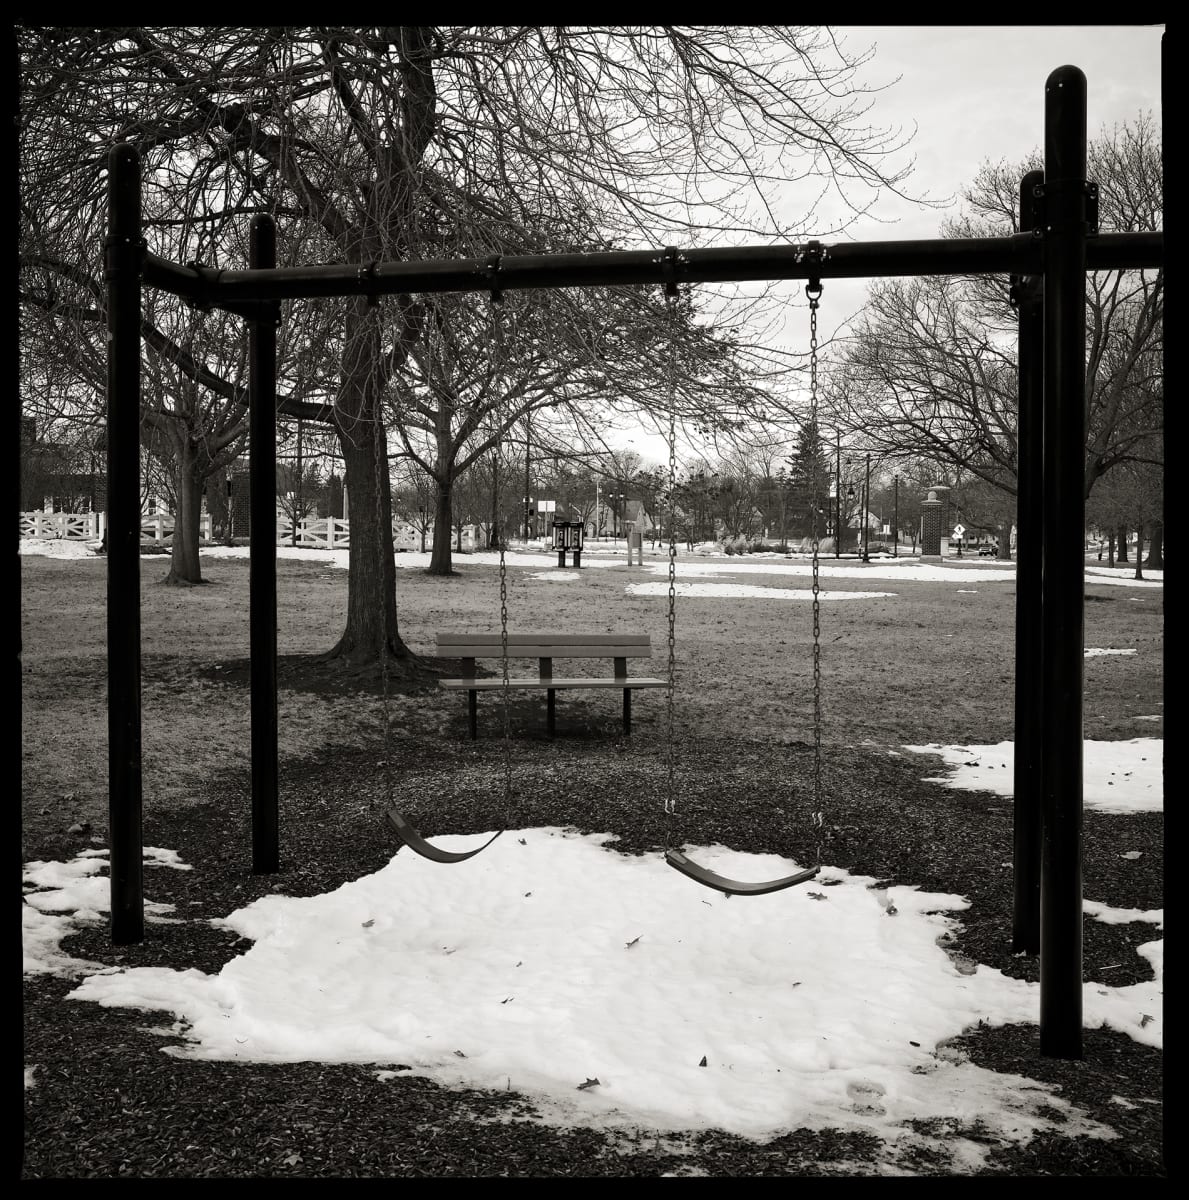 585.663.9803 & 585.663.9611 – 188 Beach Avenue, Rochester, NY 14612 by Eric T. Kunsman  Image: ID: A black and white image shows a swing set with two swings. There is a pile of snow beneath the swings.  There is a wooden bench and tree behind the left swing. In the distance, there is a pair of pay phones between the swings.